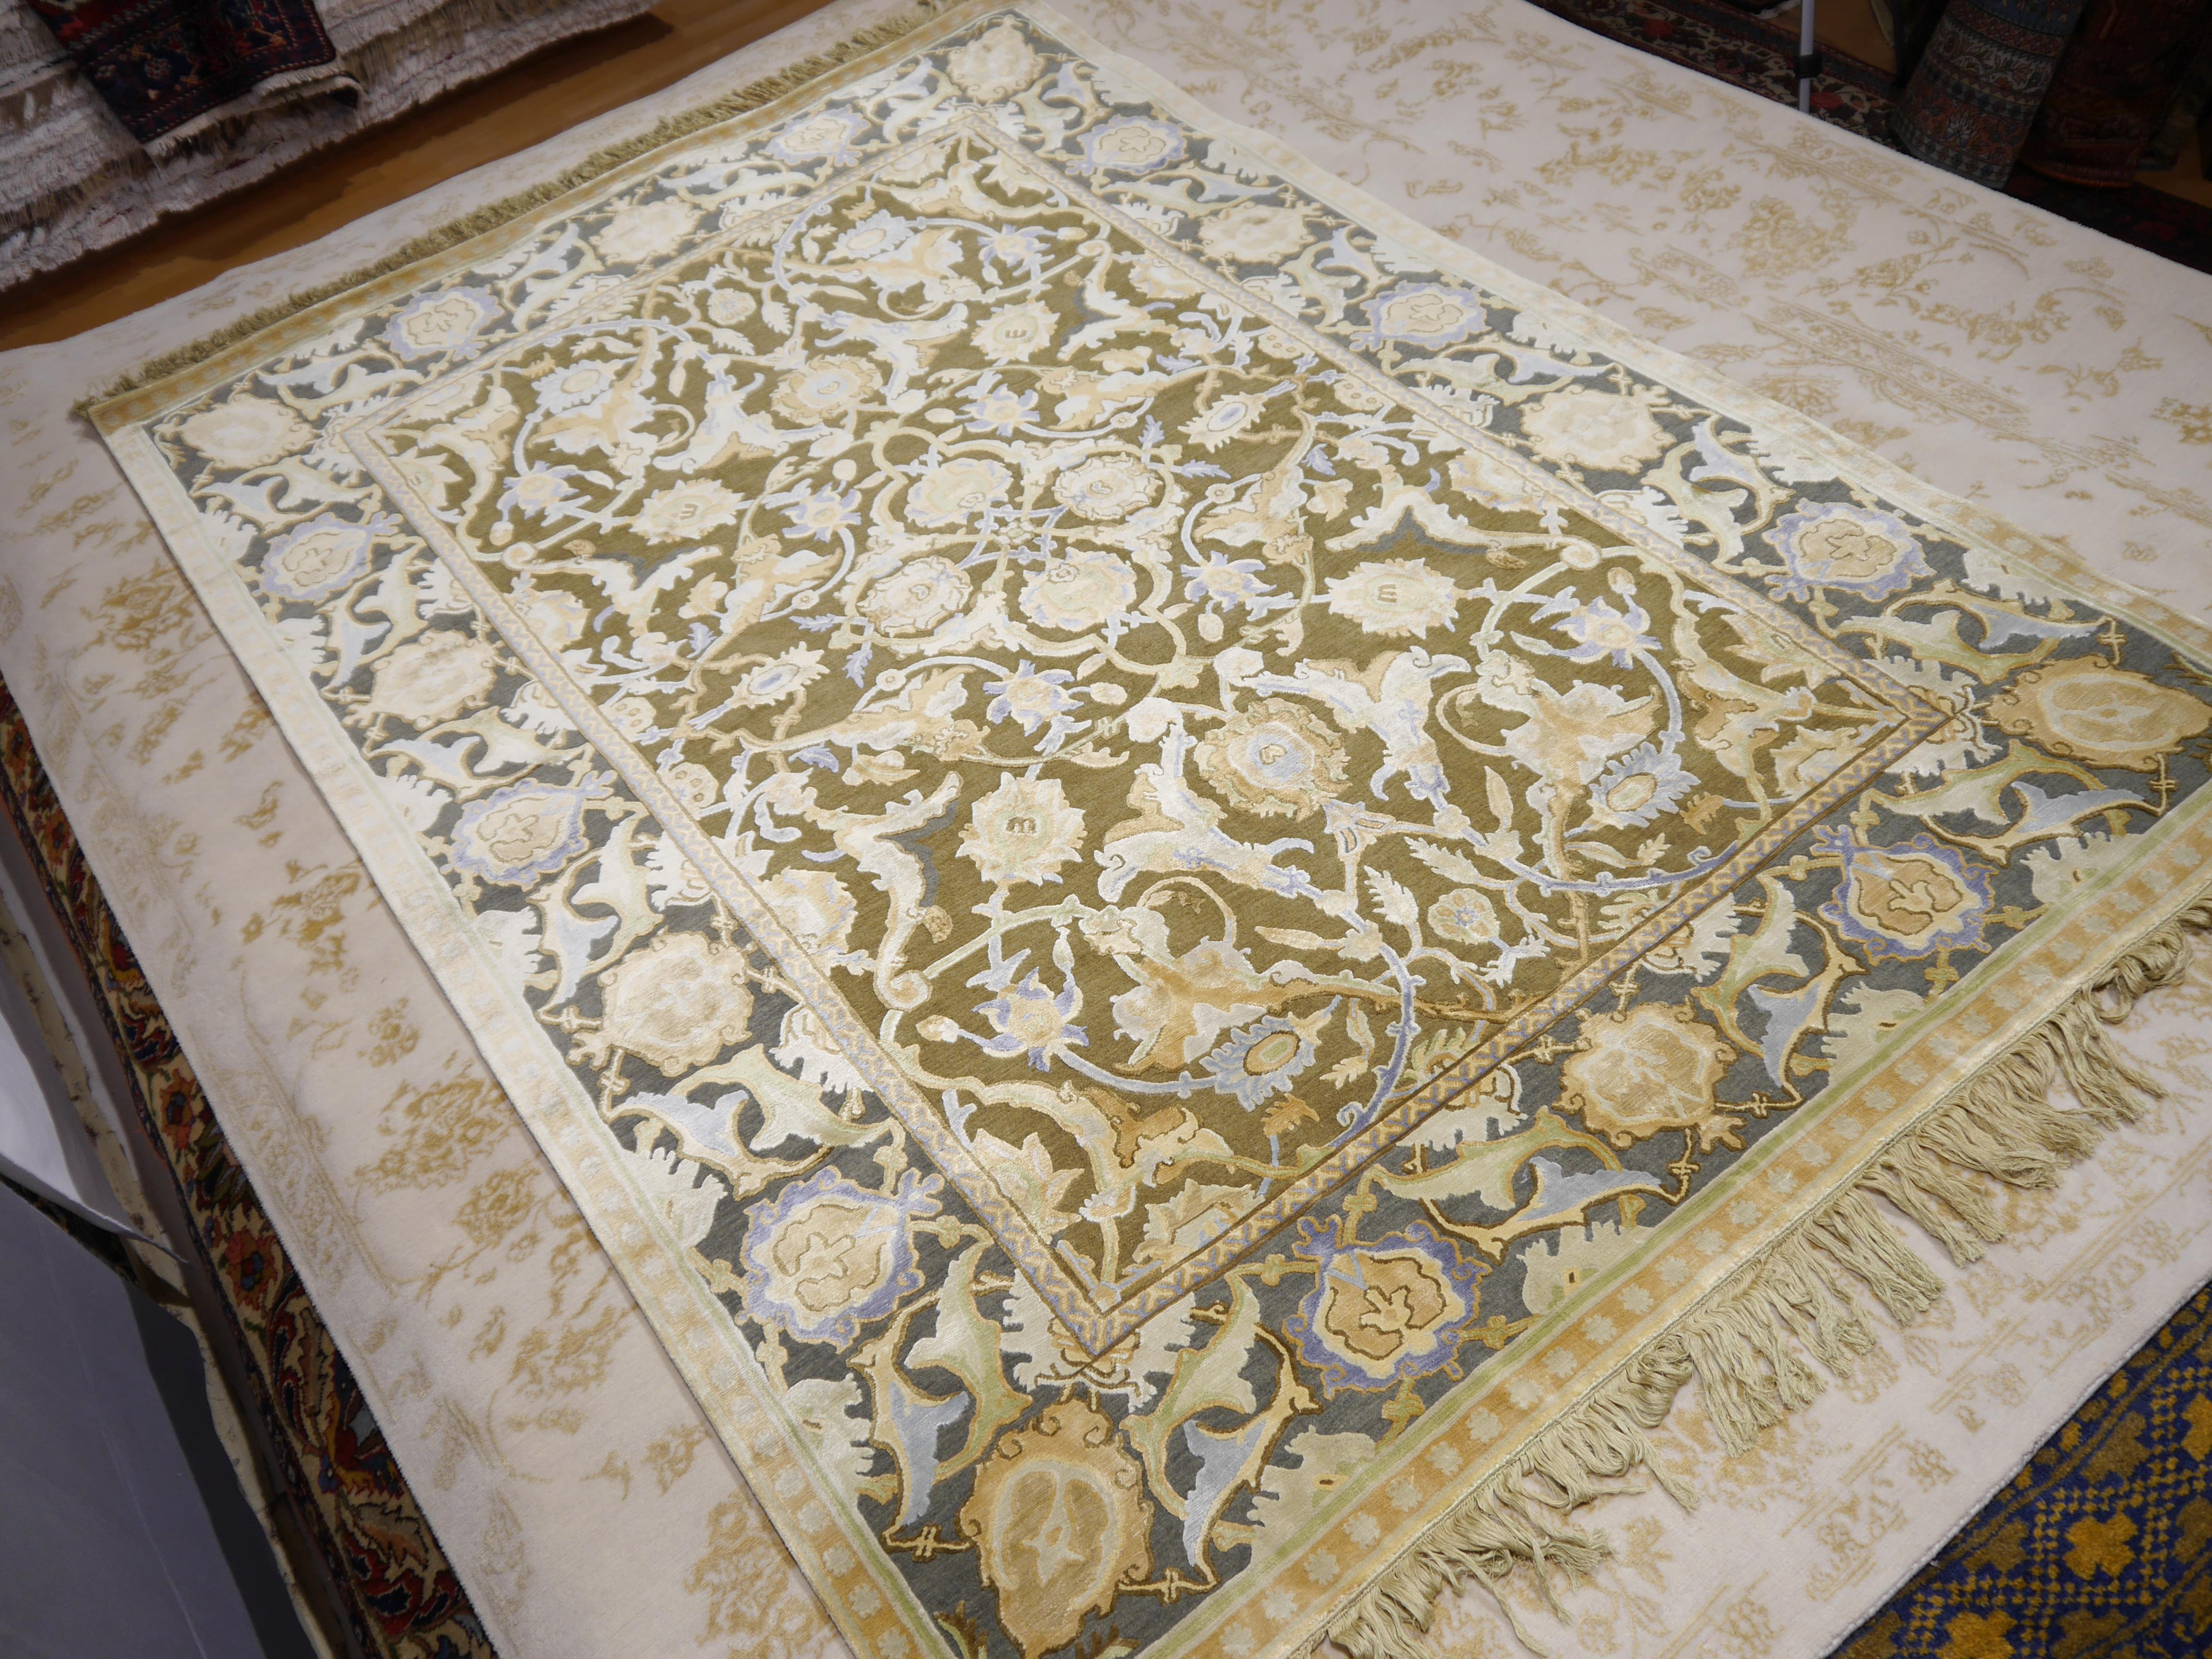 A beautiful new and made to order Polonaise carpet, hand knotted using finest Chinese mulberry silk and Tibetan Highland Wool. 

The design features typical elements of the Persian Safavid period in late 17th century, when the original rug was